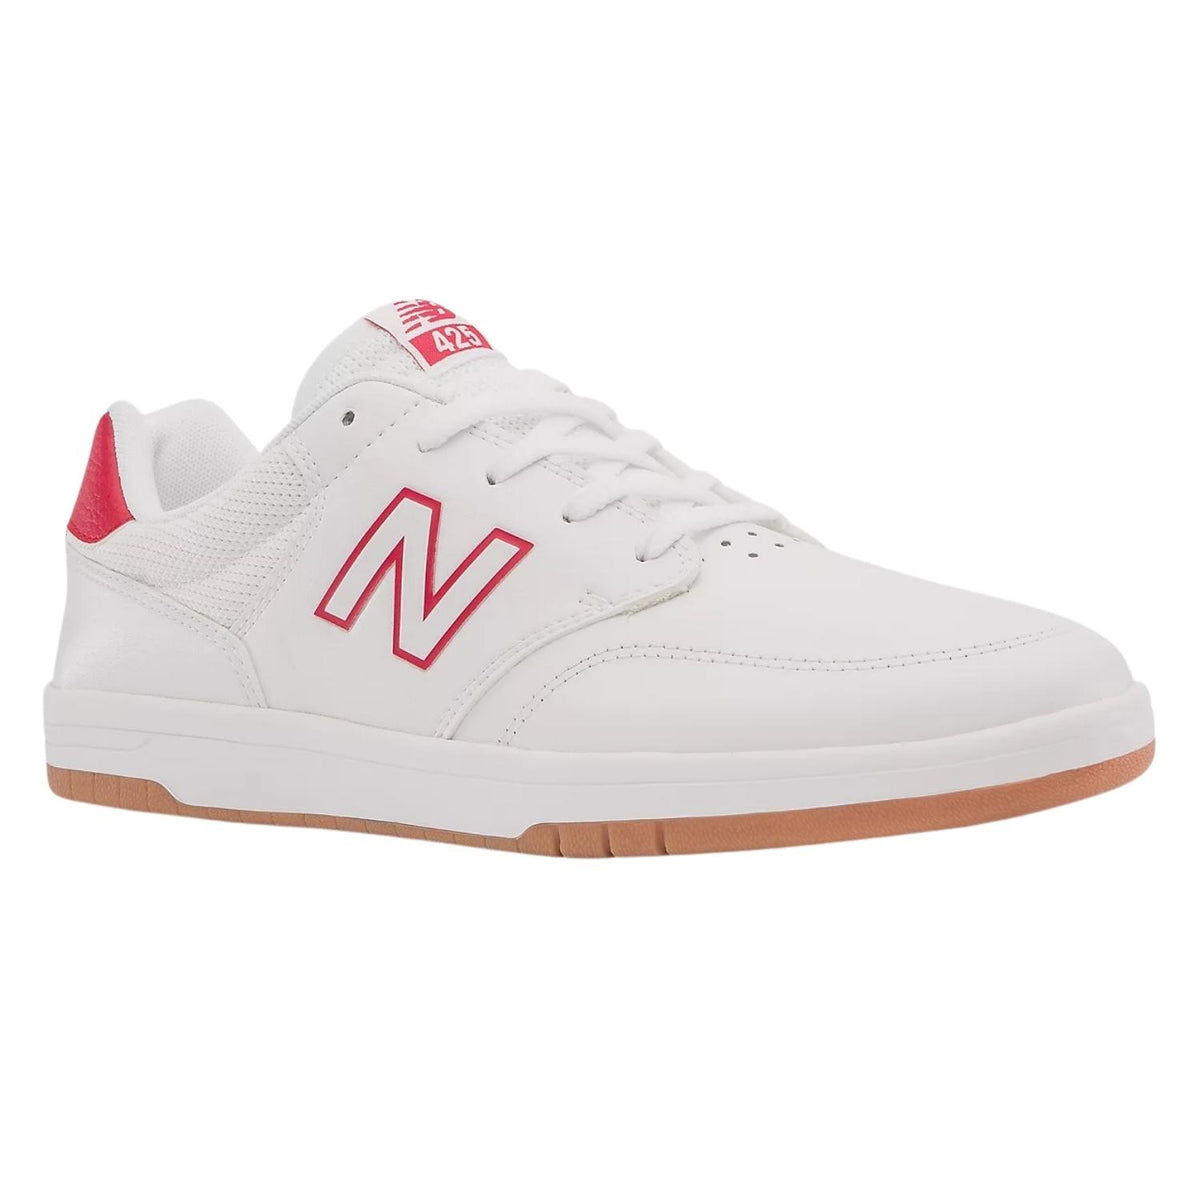 New Balance Numeric NM425 Shoes - White/Red - Mens Casual Shoes by New Balance Numeric